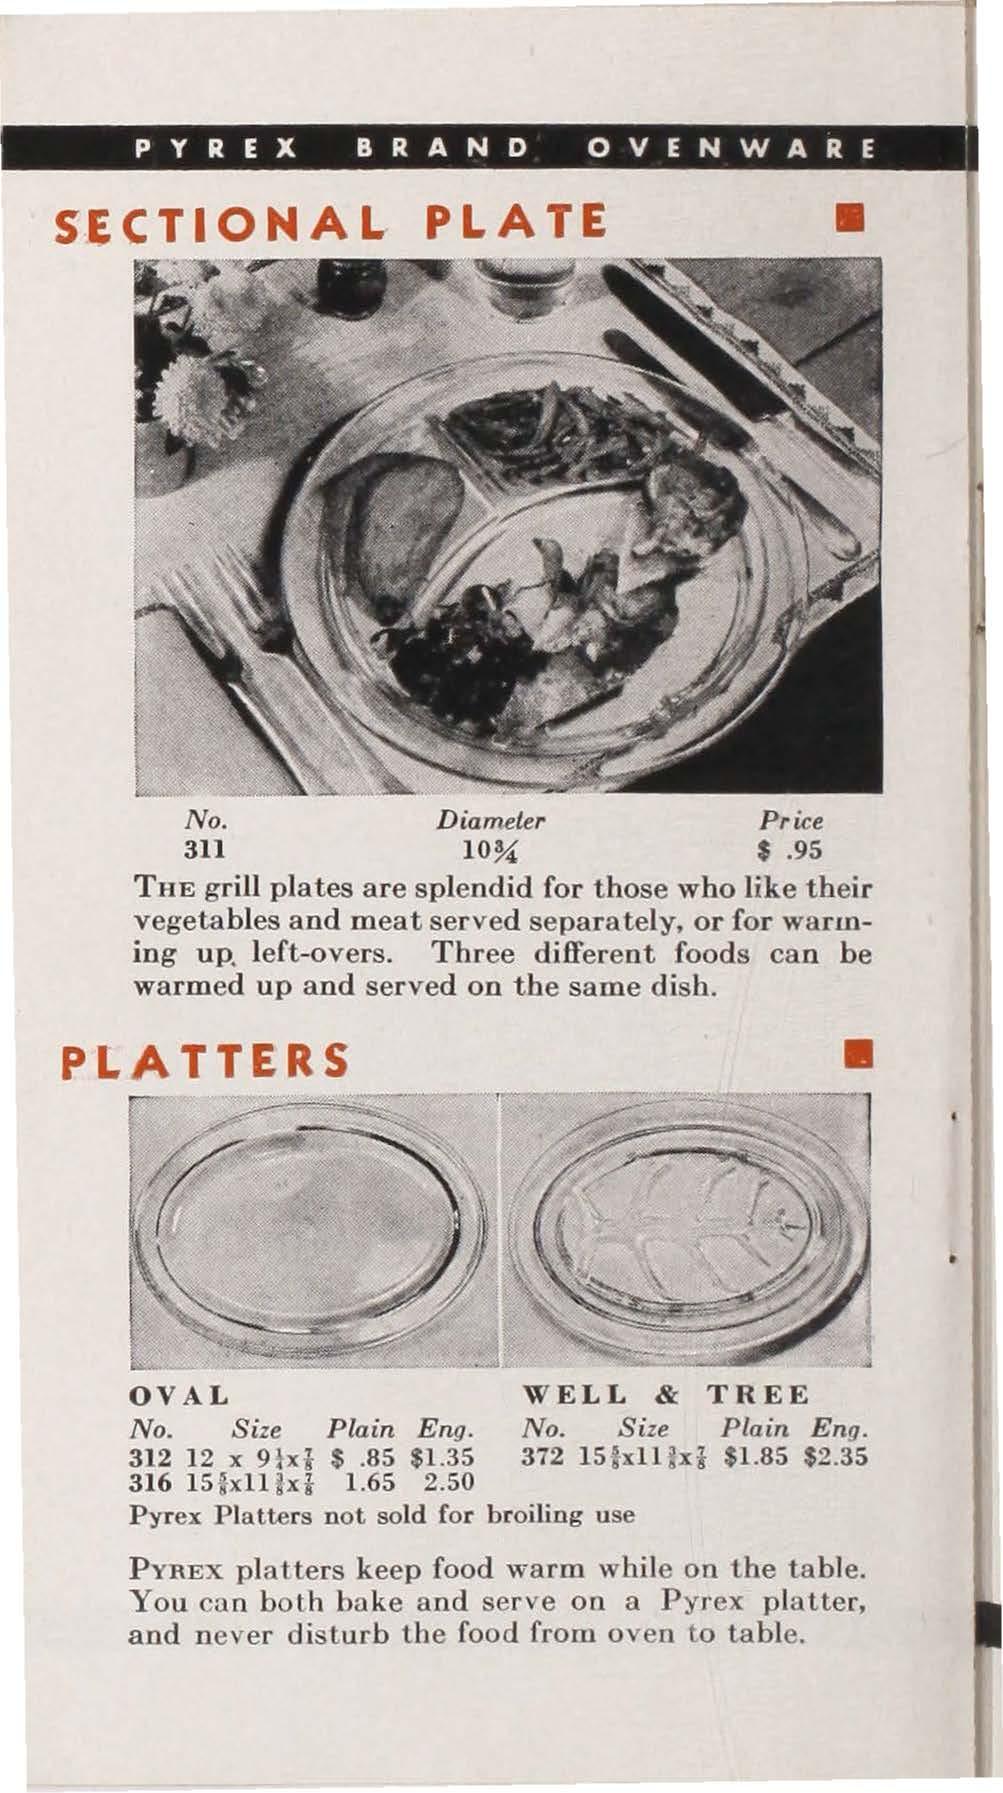 SECTIONAL. PLATE No. Diameter Pr ice 311 10~ $.95 THE grill plates are splendid for those who like their vegetables and meat served separately, or for warming up. left-overs.